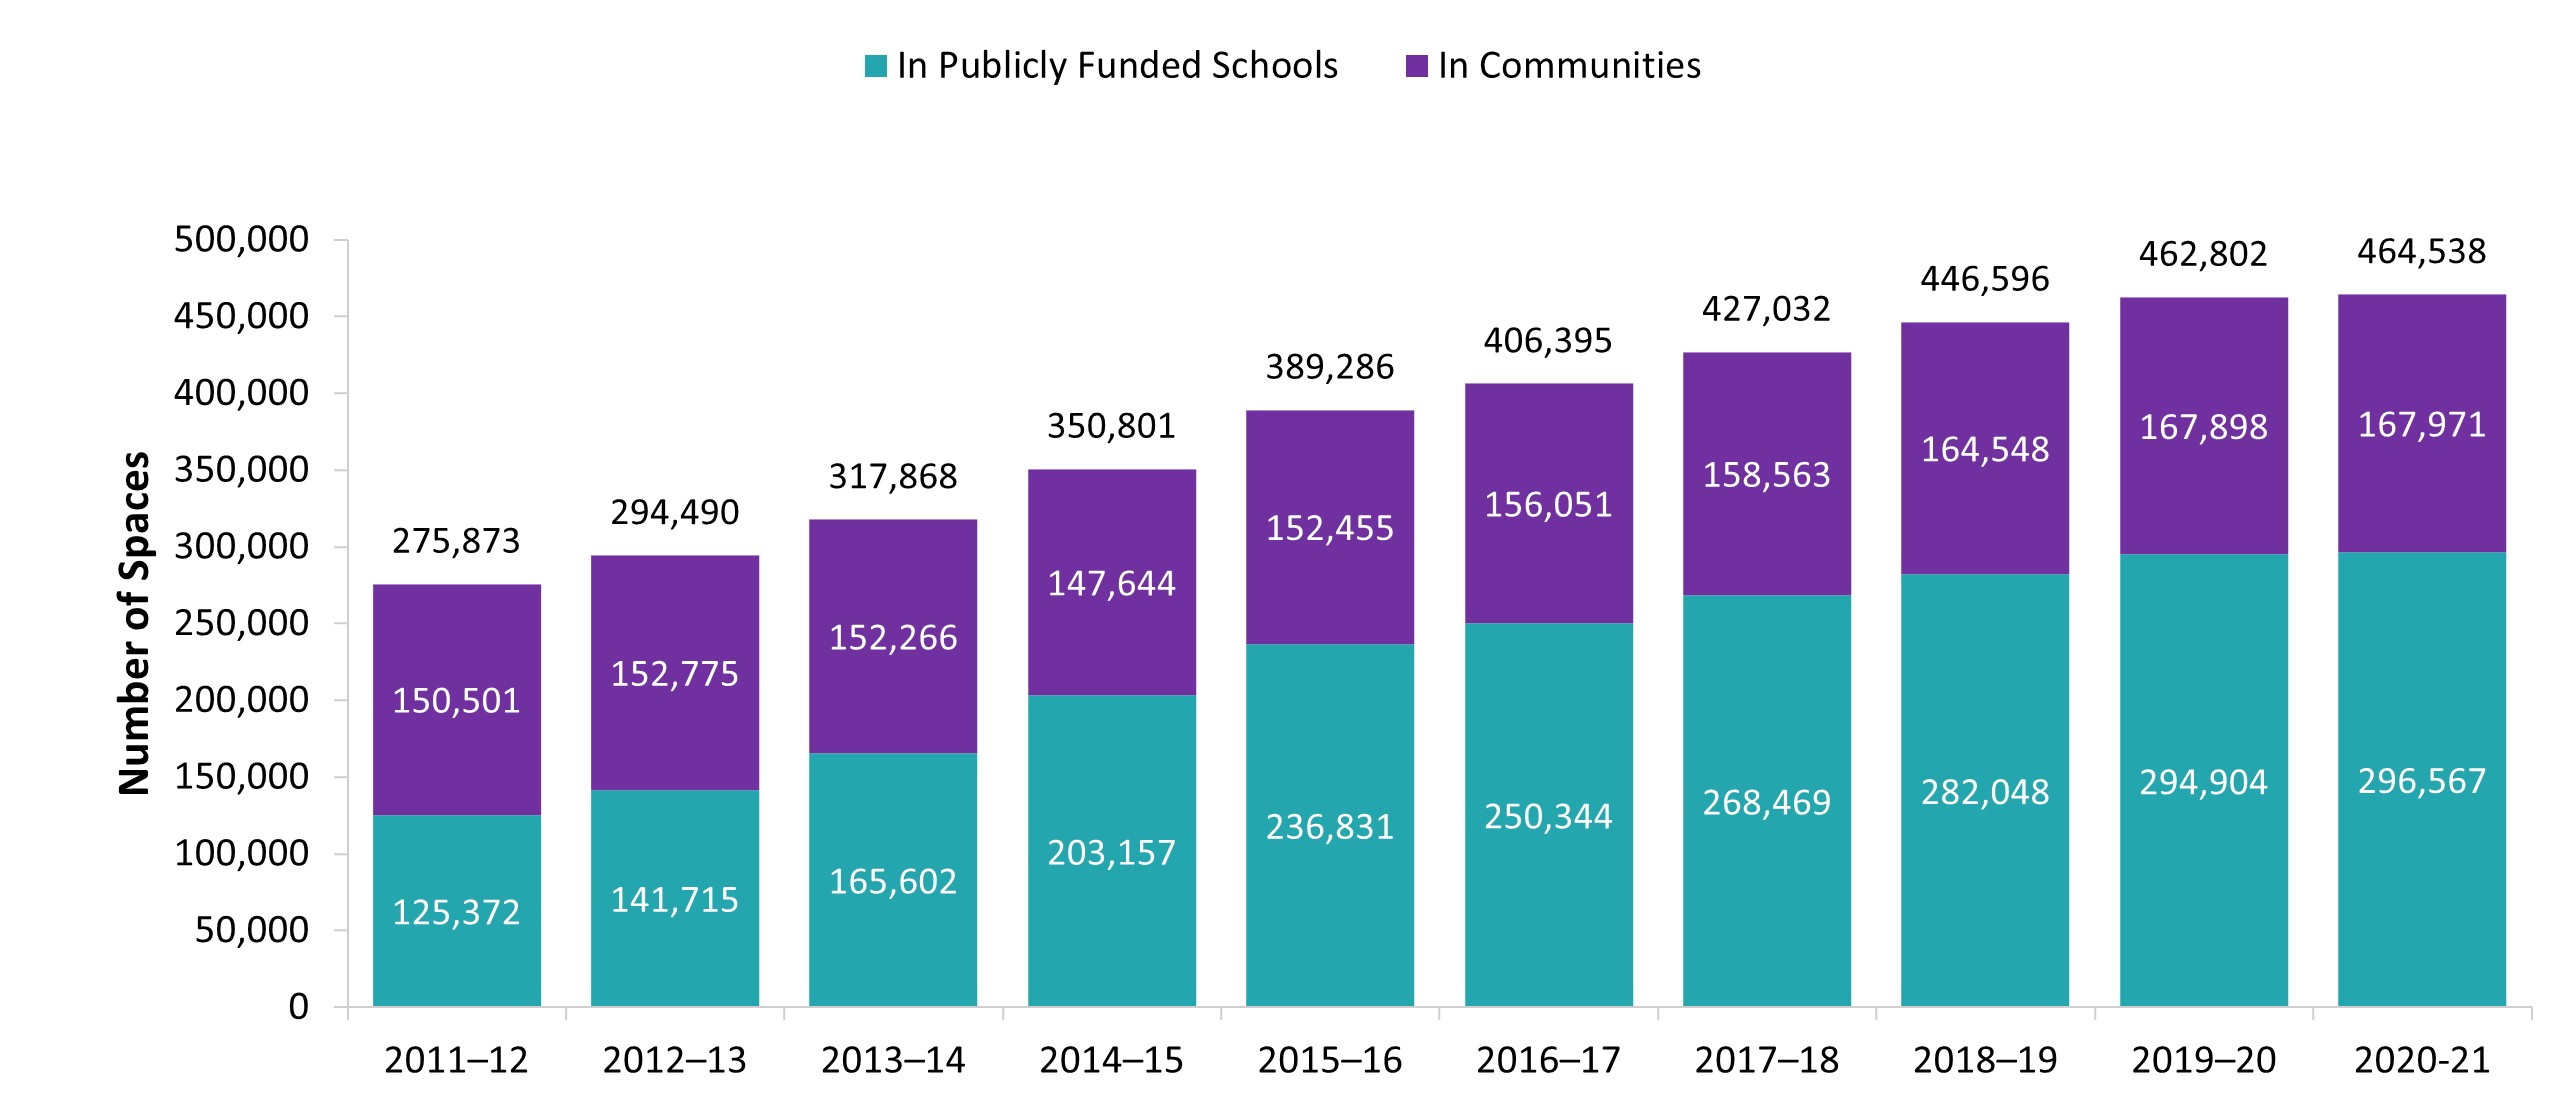 Licensed child care spaces in publicly funded schools and in communities, 2011-12 to 2020-21